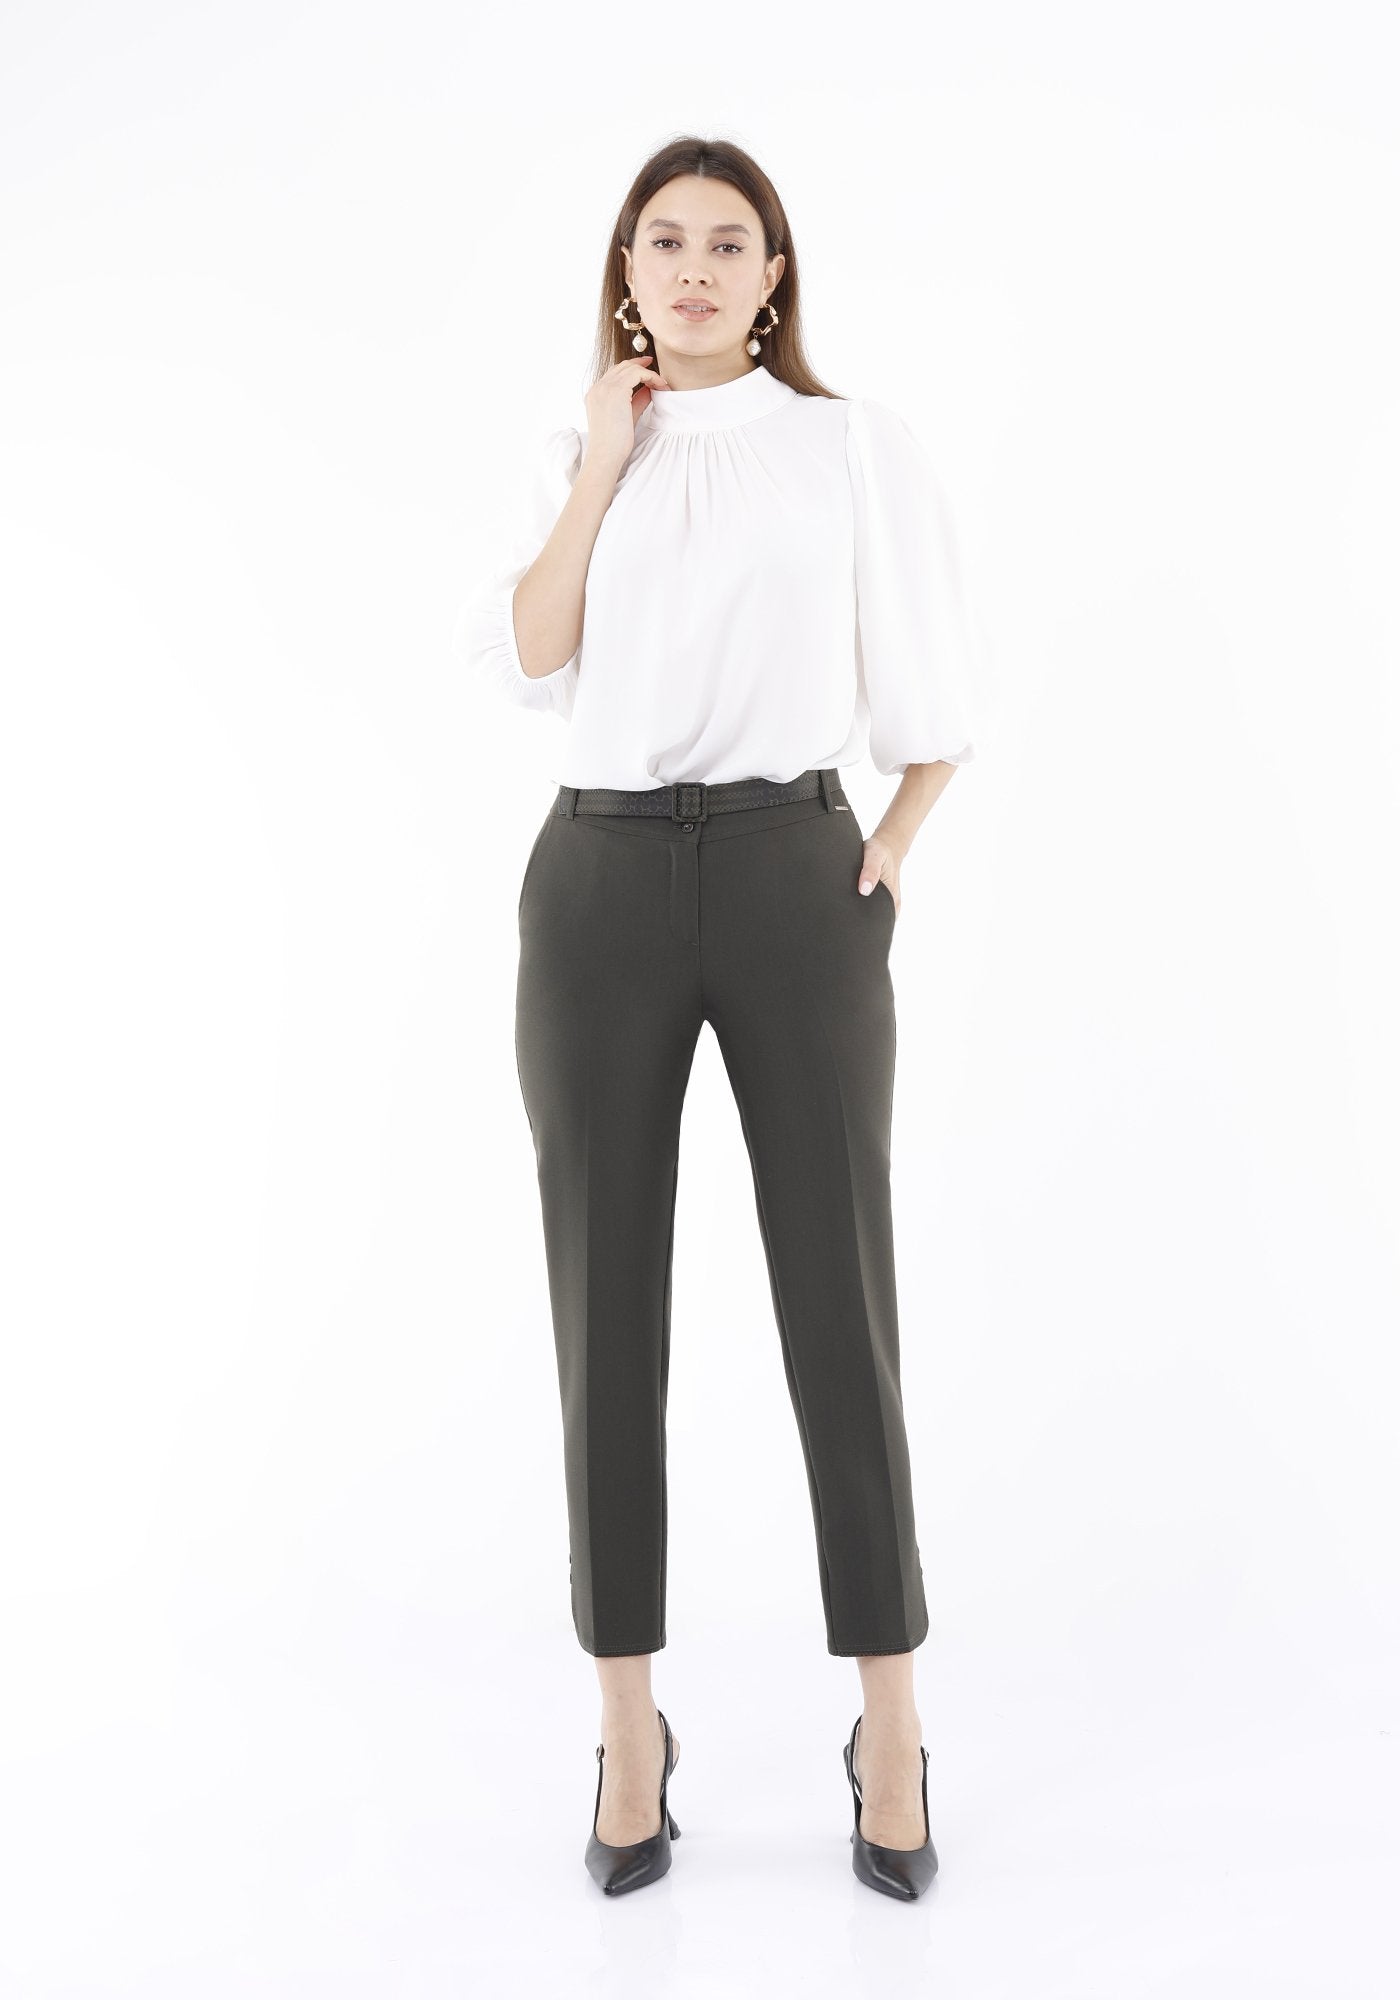 Guzella Slim Fit Ankle Length Women's Khaki Pants with Buttons and Leather Details Guzella